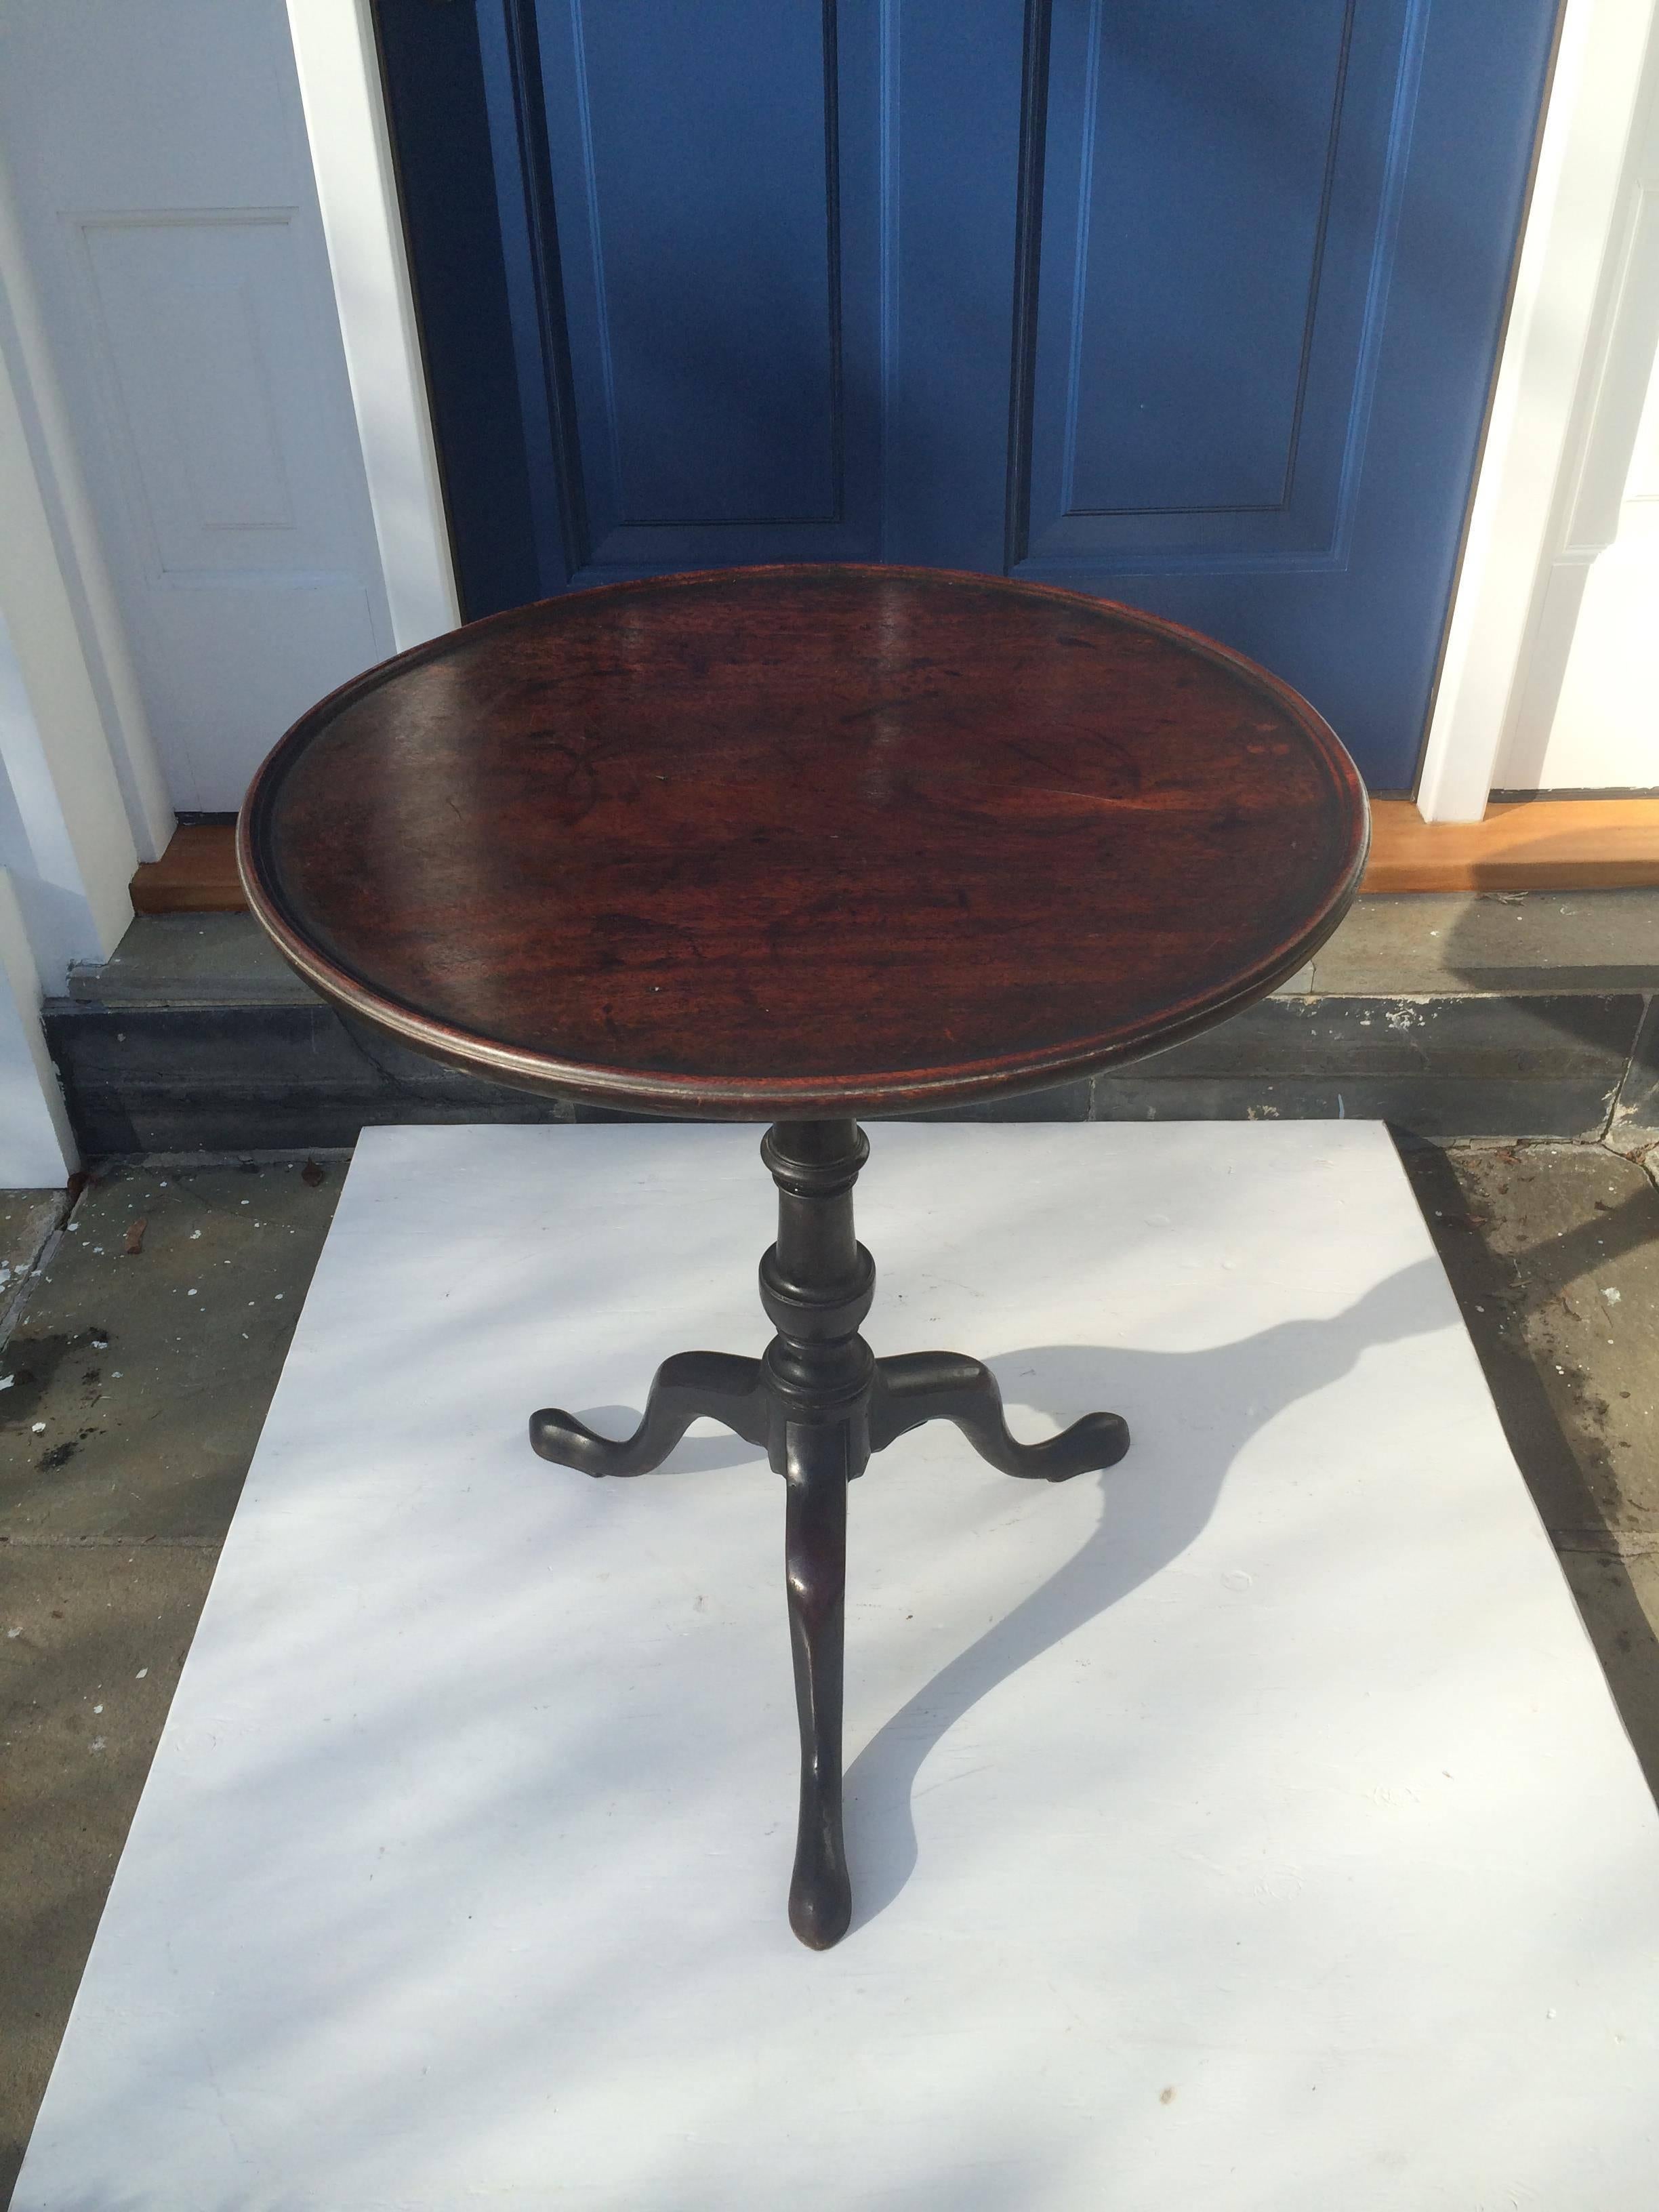 George III mahogany tilt-top table, England, 18th century. Circular rimmed tilting top above turned column and tripod base with pad feet.

 